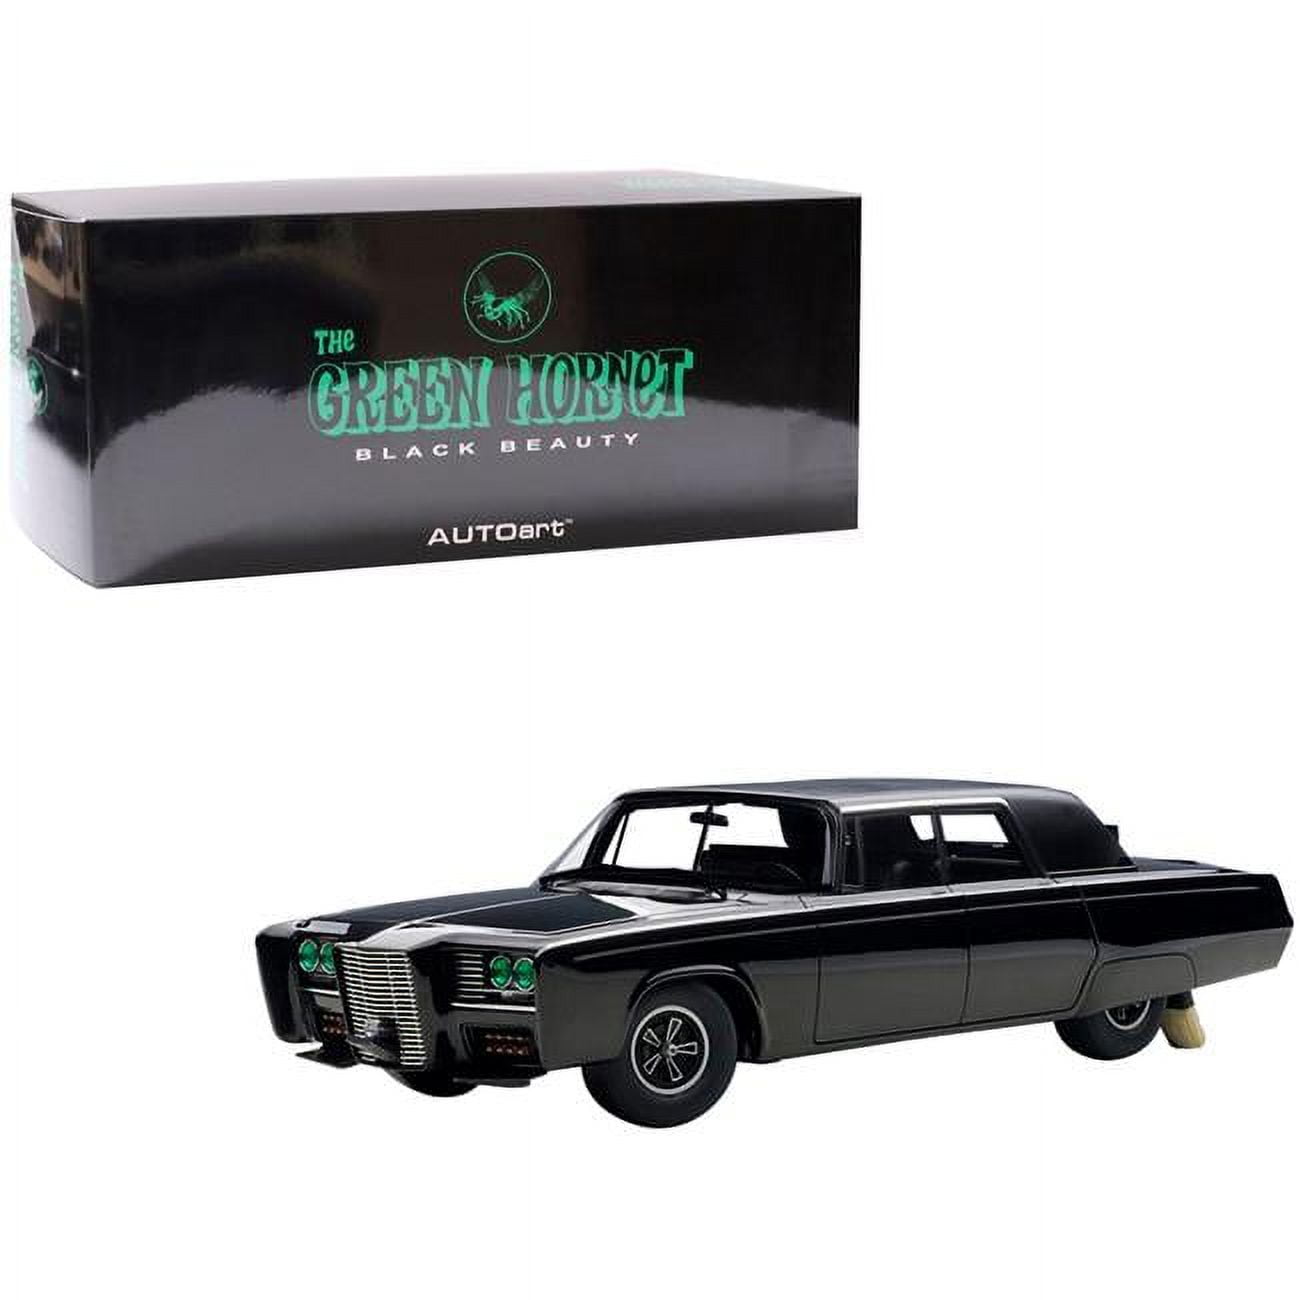 Picture of Autoart 71546 Black Beauty The Green Hornet 1966-1967 TV Series 1-18 Diecast Model Car